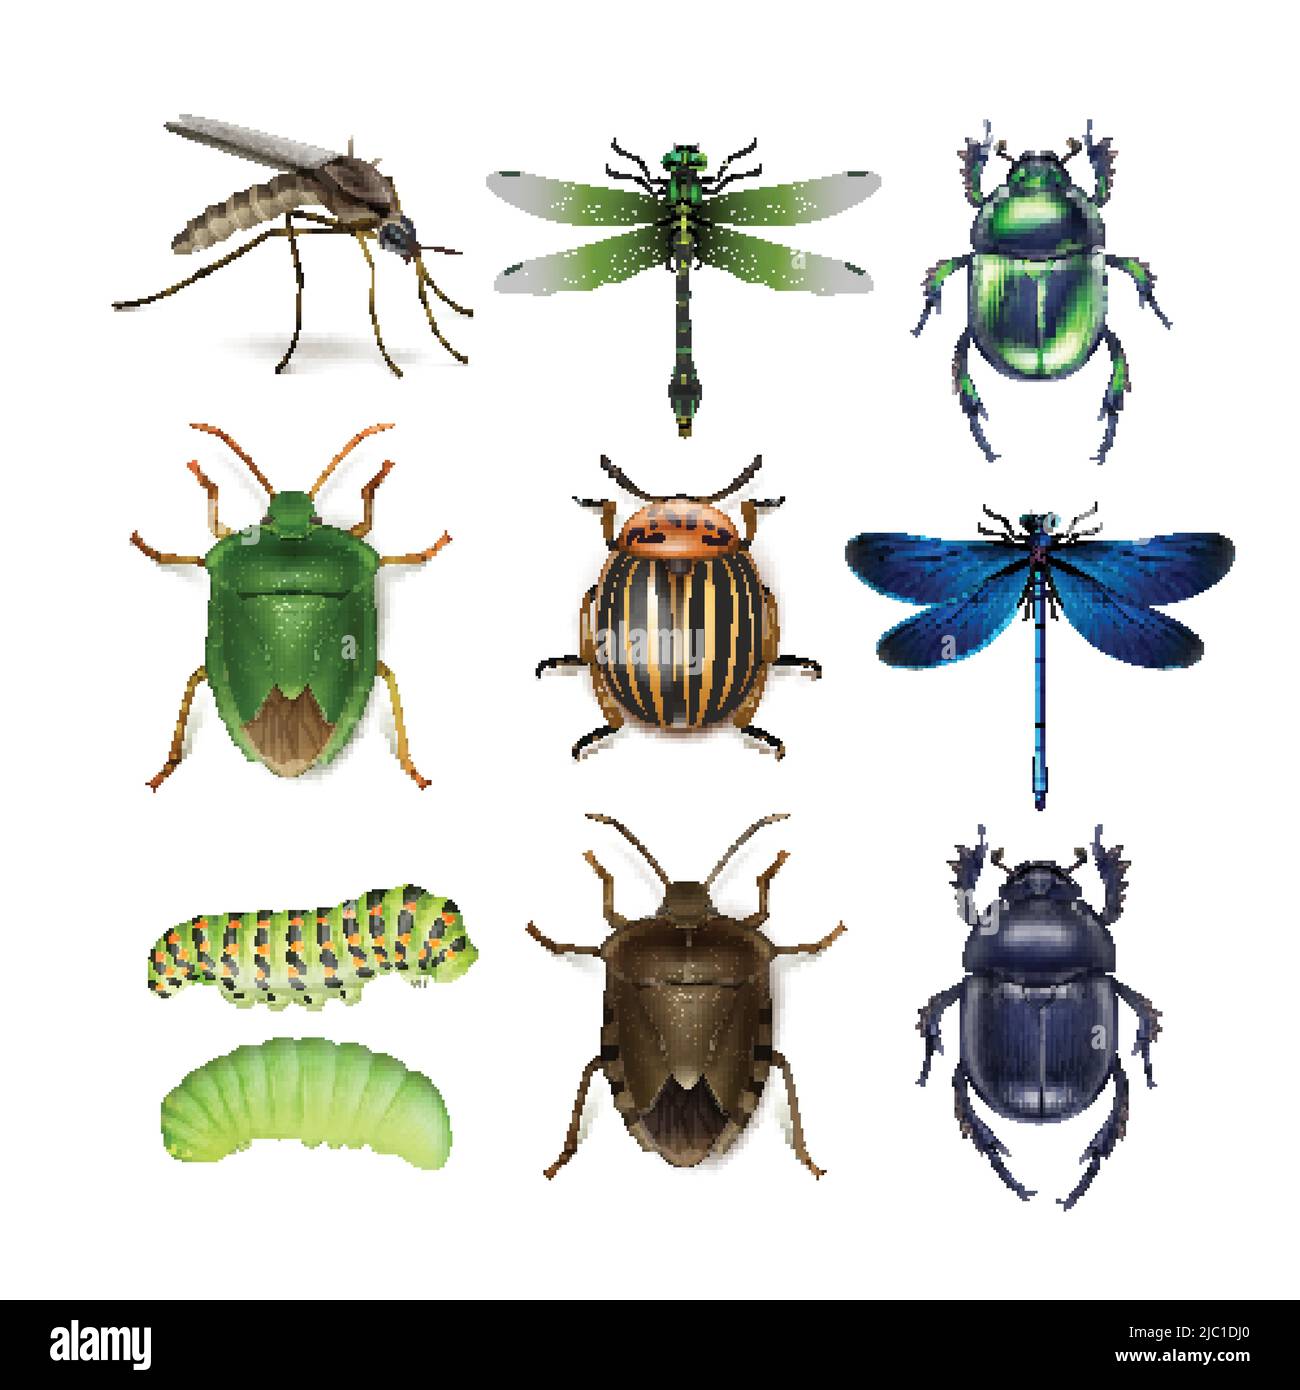 Vector set of different insects gnat, dragonflies, colorado potato beetle, scarabs, green and brown stink bugs, caterpillars top view isolated on whit Stock Vector